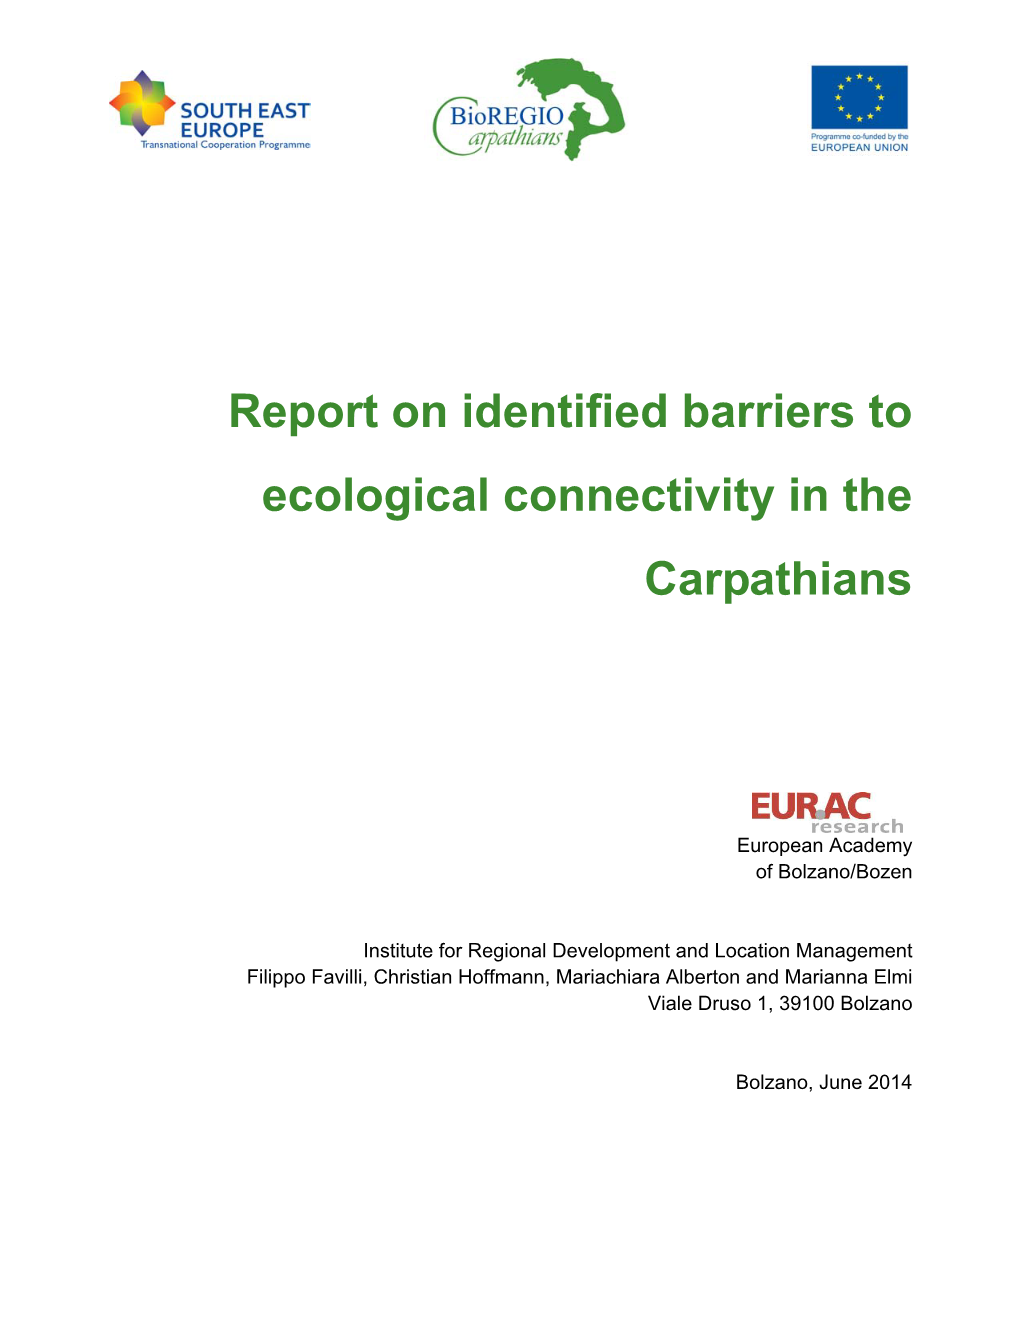 Report on Identified Barriers to Ecological Connectivity in The